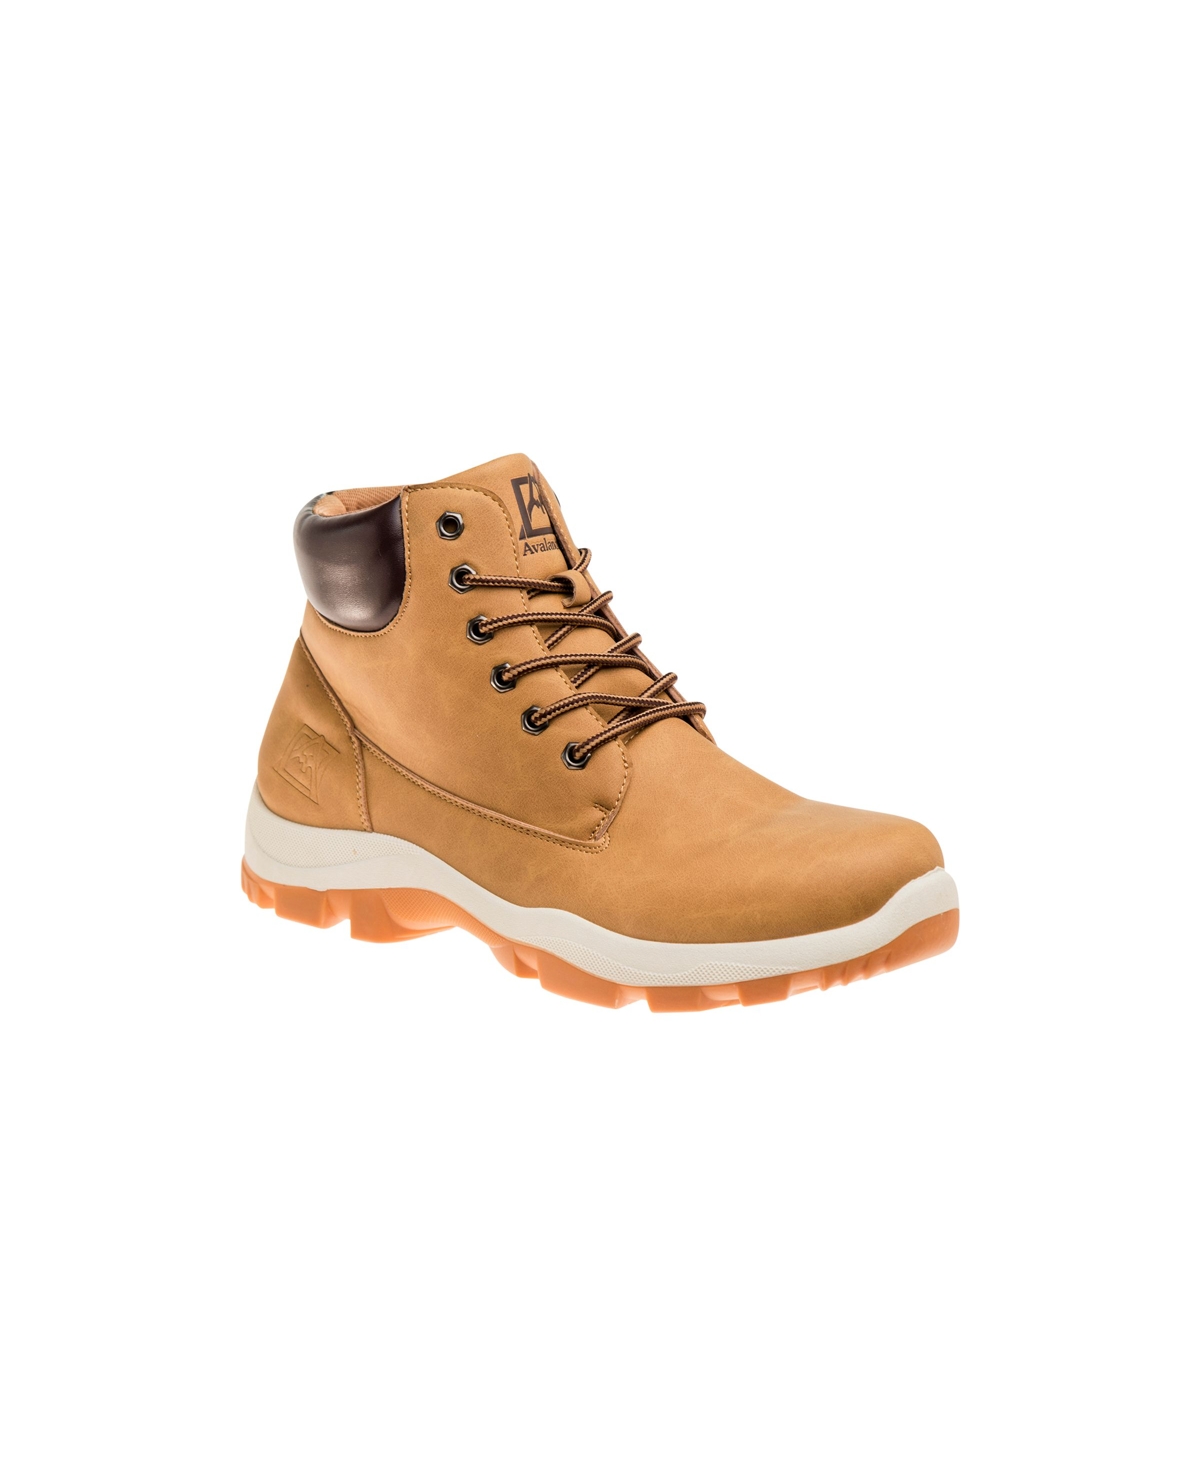 Avalanche Men's Casual Boots